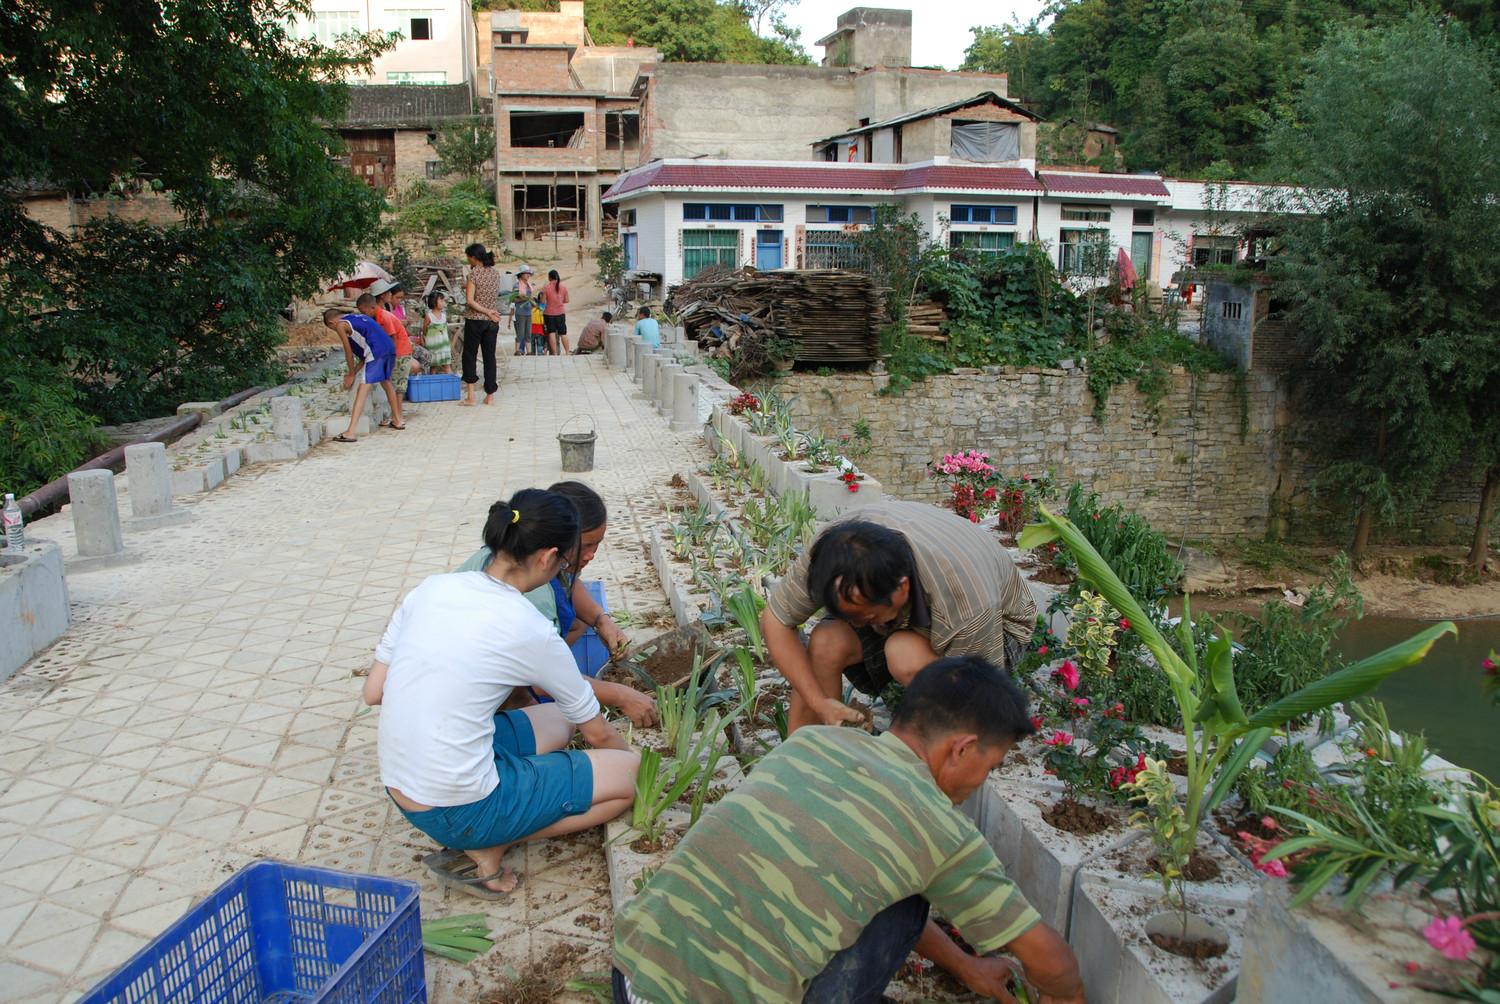 Villagers and students planting together